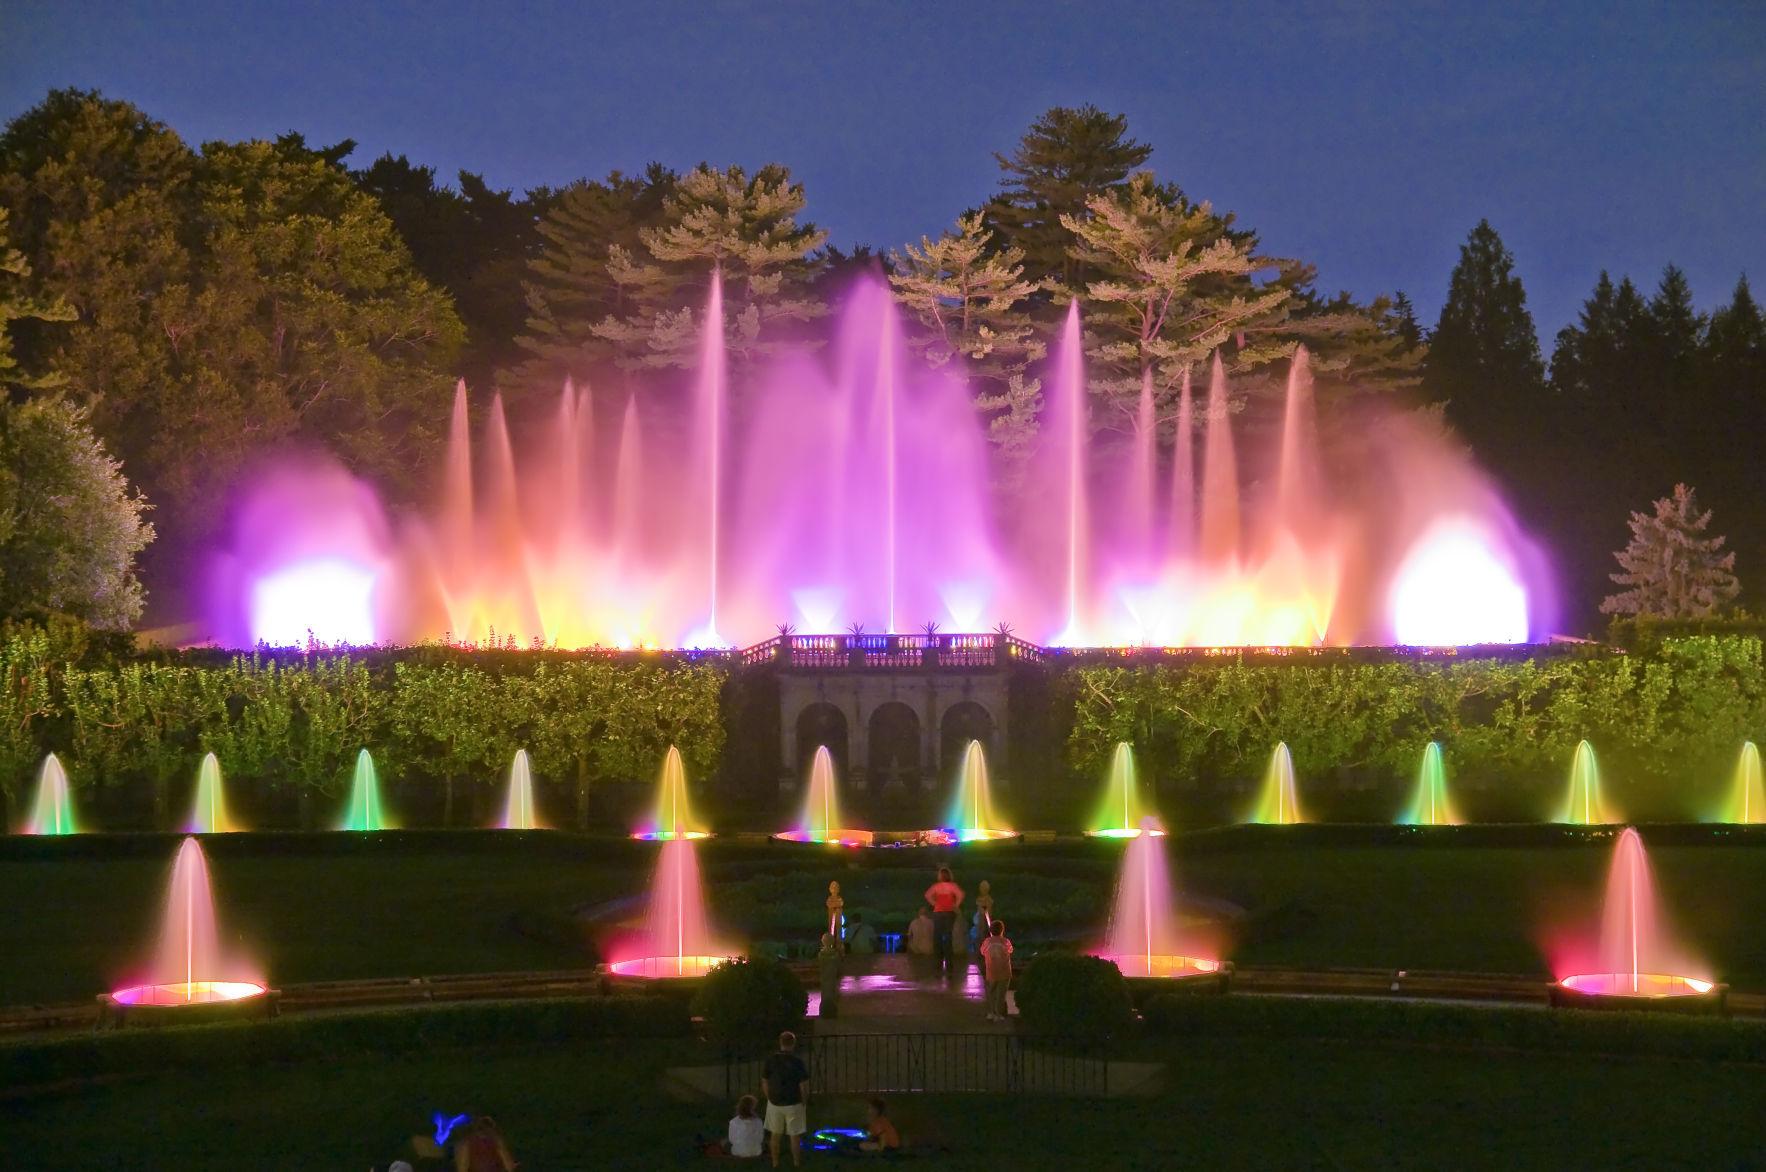 The Longwood fountain show hits the screen Entertainment